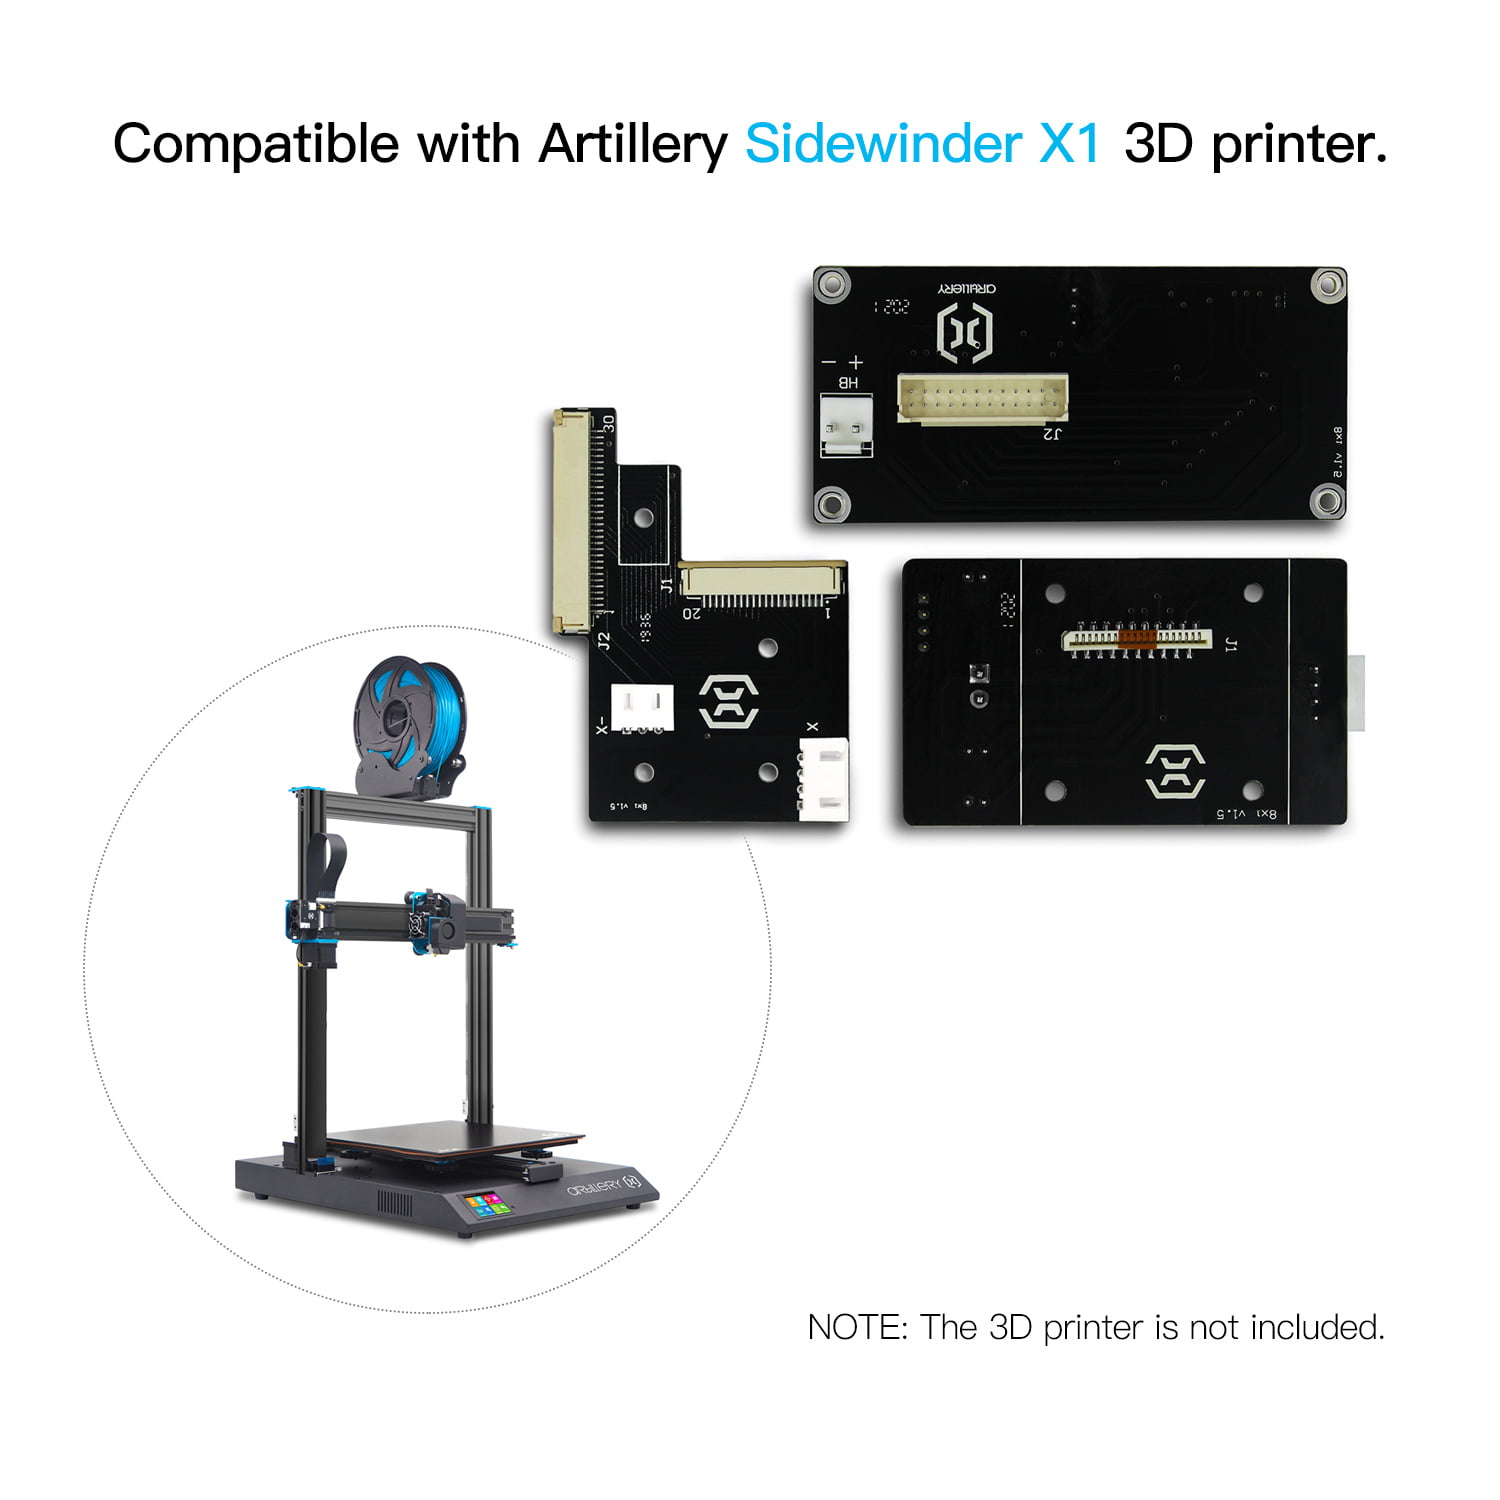 Spare parts and accessories for the improvement of 3D Artillery printer. Artillery 3D Printer PCB Adapter Board Replacement Kit for Sidewinder X1 SW-X1